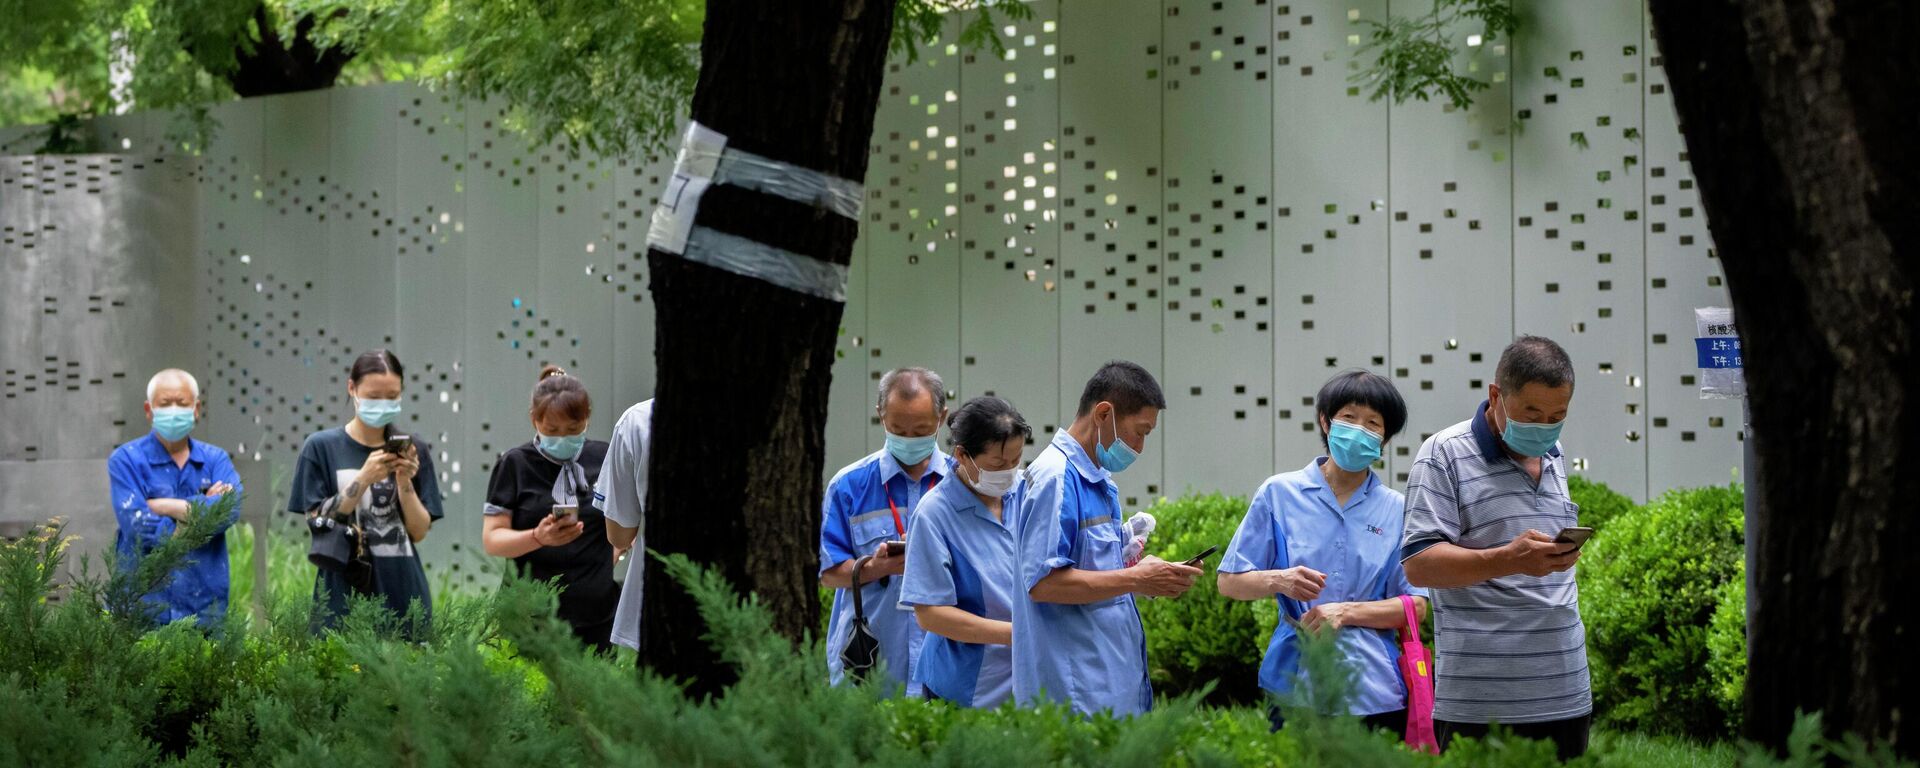 People wearing face masks stand in line for COVID-19 tests at a coronavirus testing site in Beijing, Wednesday, July 6, 2022. Residents of parts of Shanghai and Beijing have been ordered to undergo further rounds of COVID-19 testing following the discovery of new cases in the two cities, while additional restrictions remain in place in Hong Kong, Macao and other cities. - Sputnik International, 1920, 28.12.2022